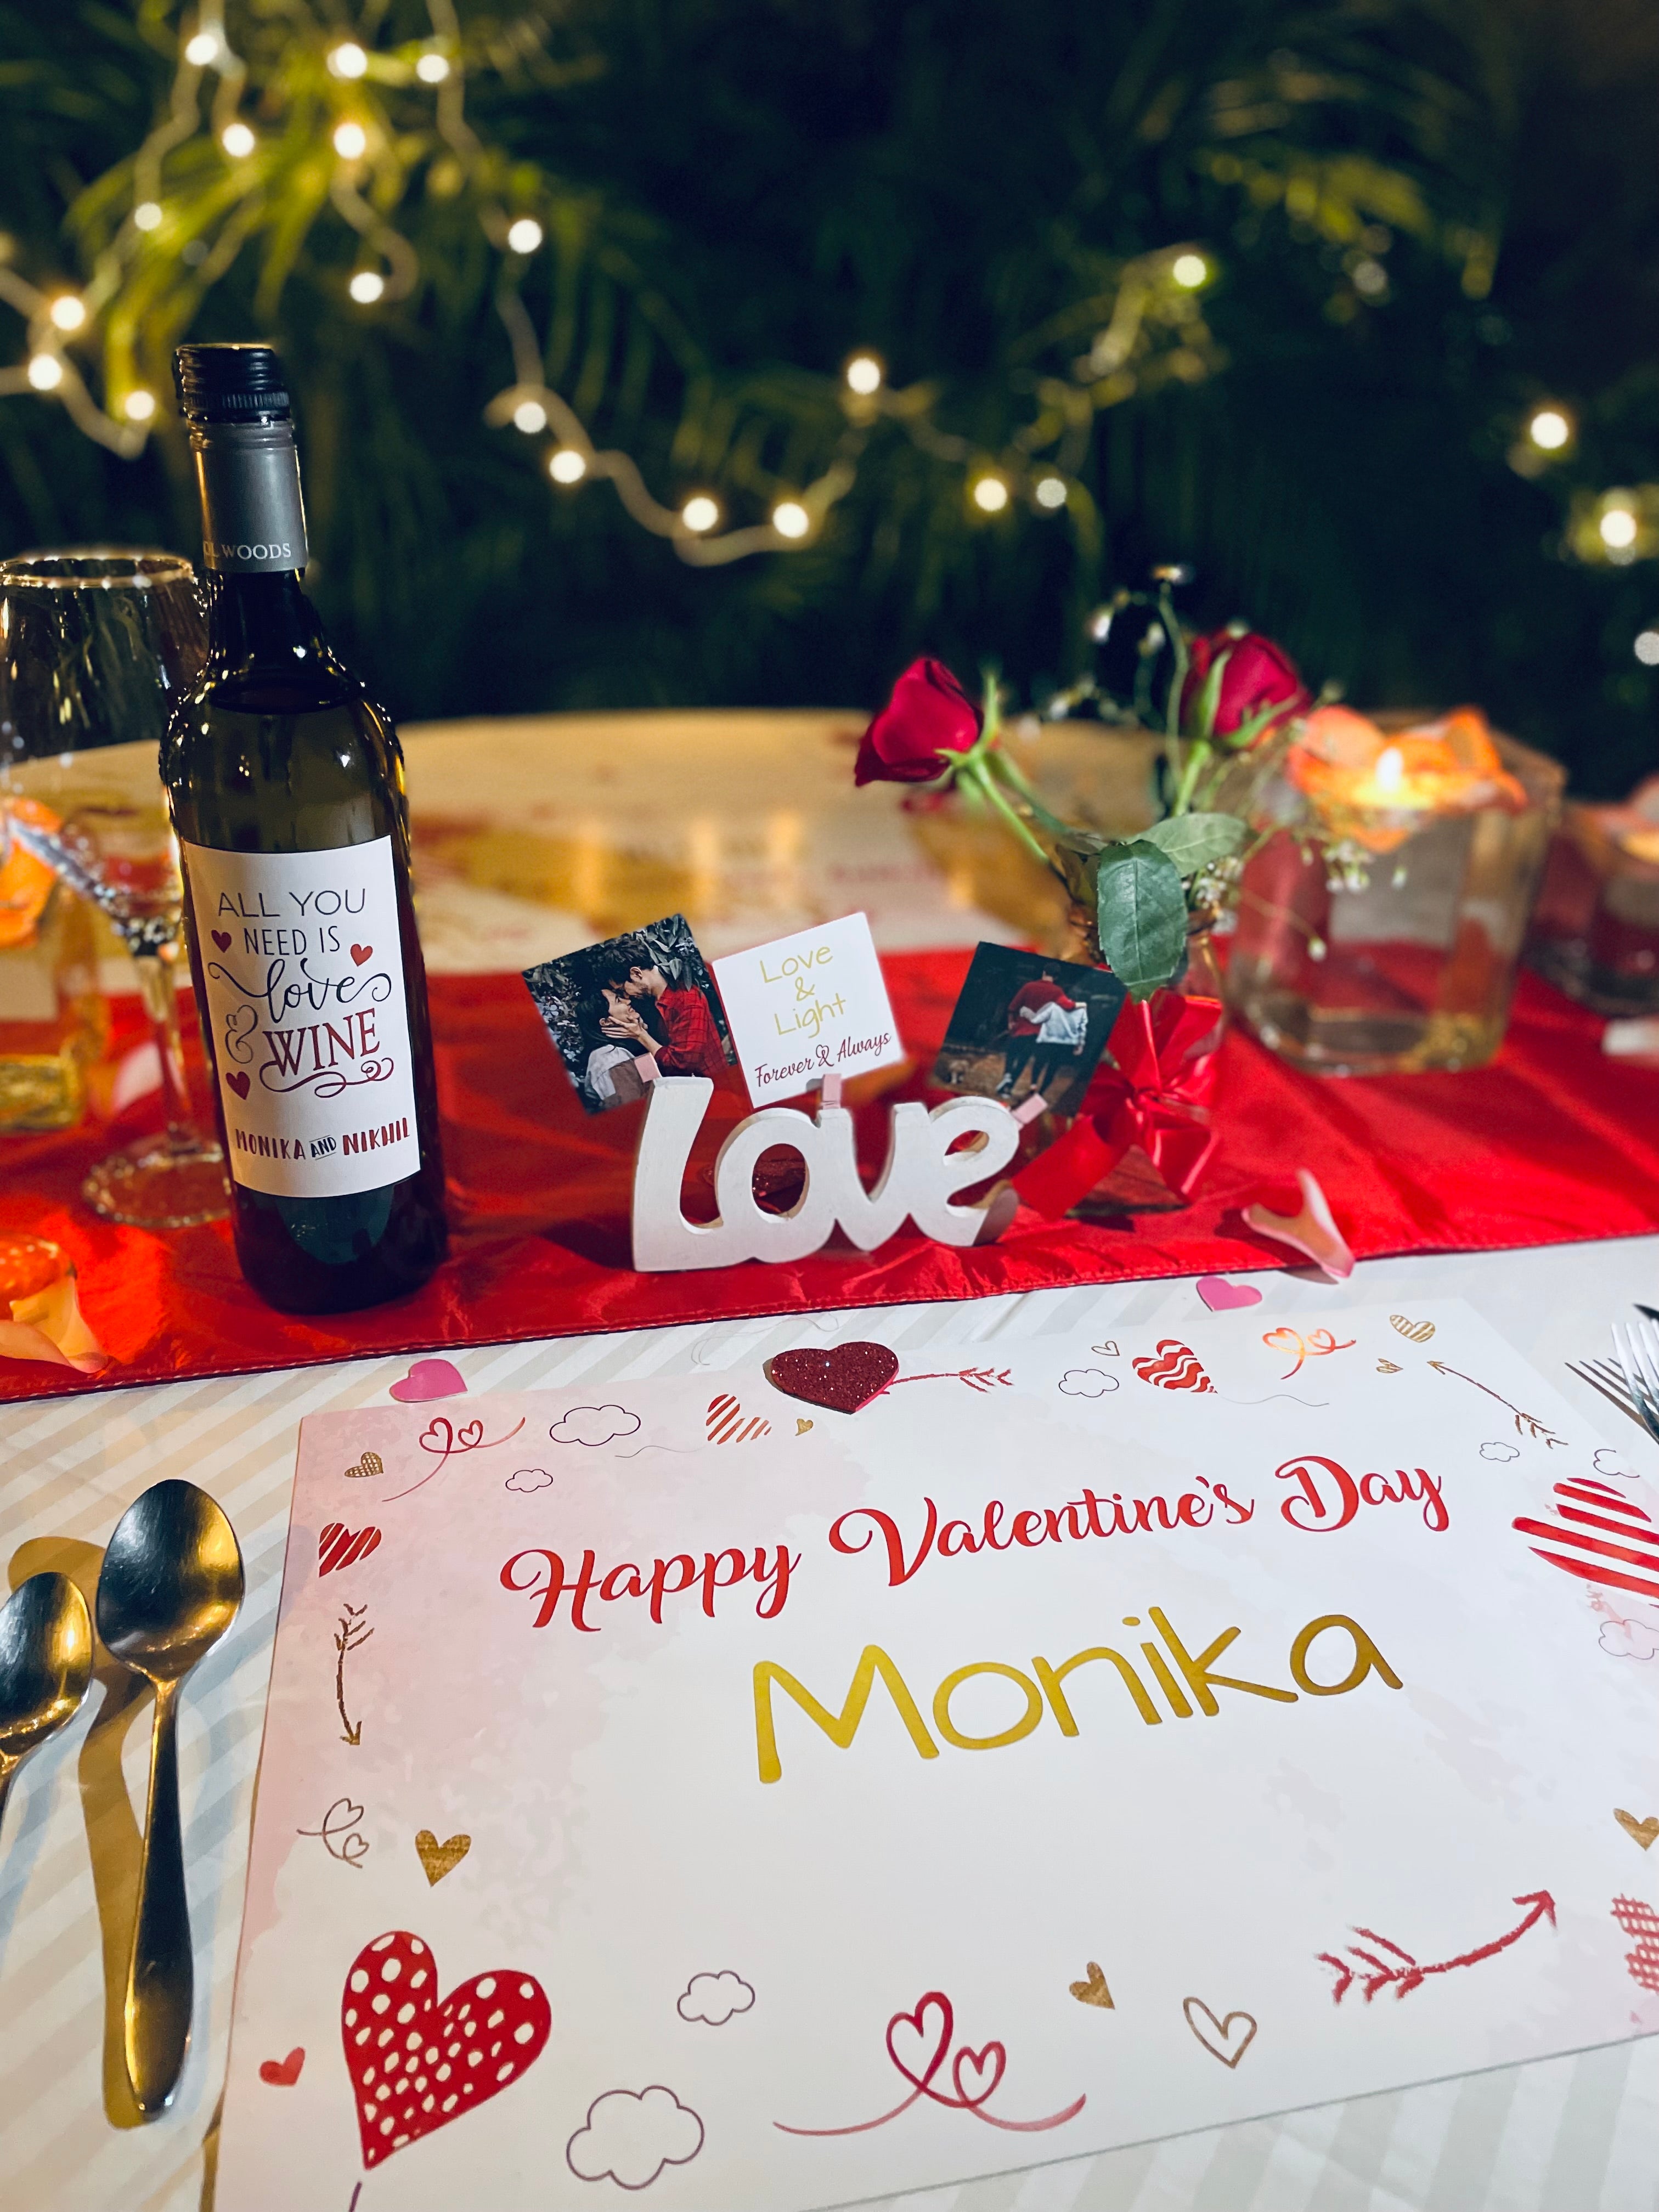 Valentines Day Personalized Dinner Setup for love birds